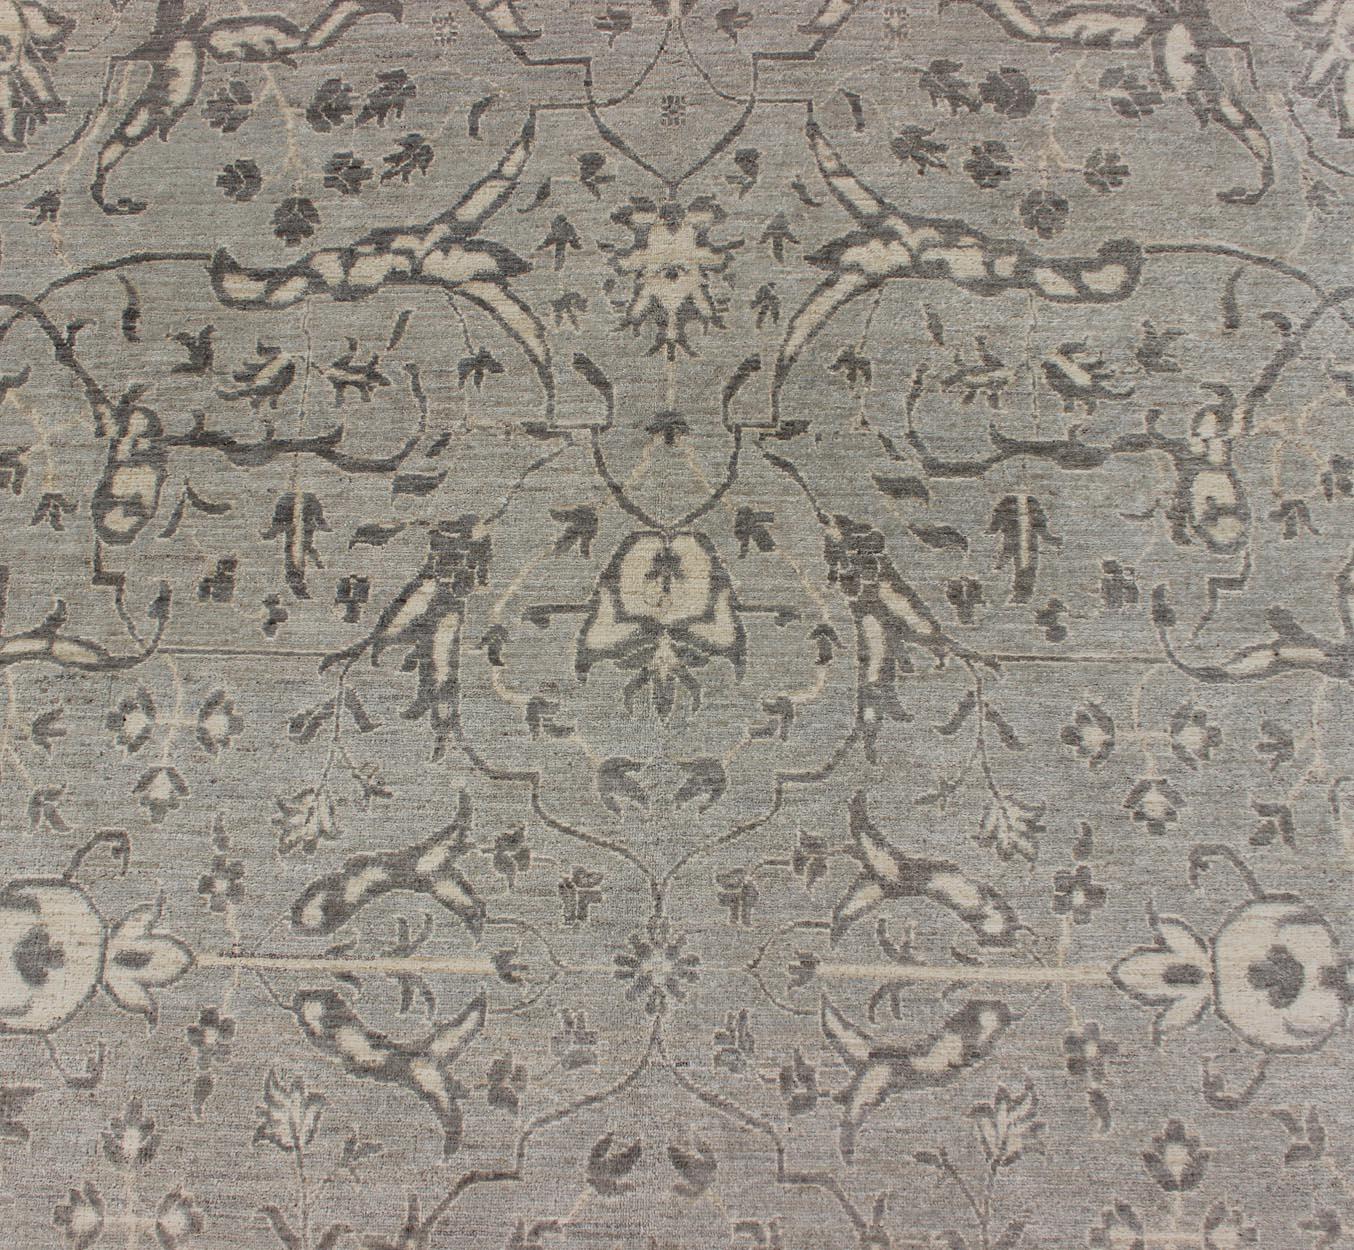 Wool Charming Tabriz Design Rug with All-Over Design in Gray's, Tan, and Cream For Sale